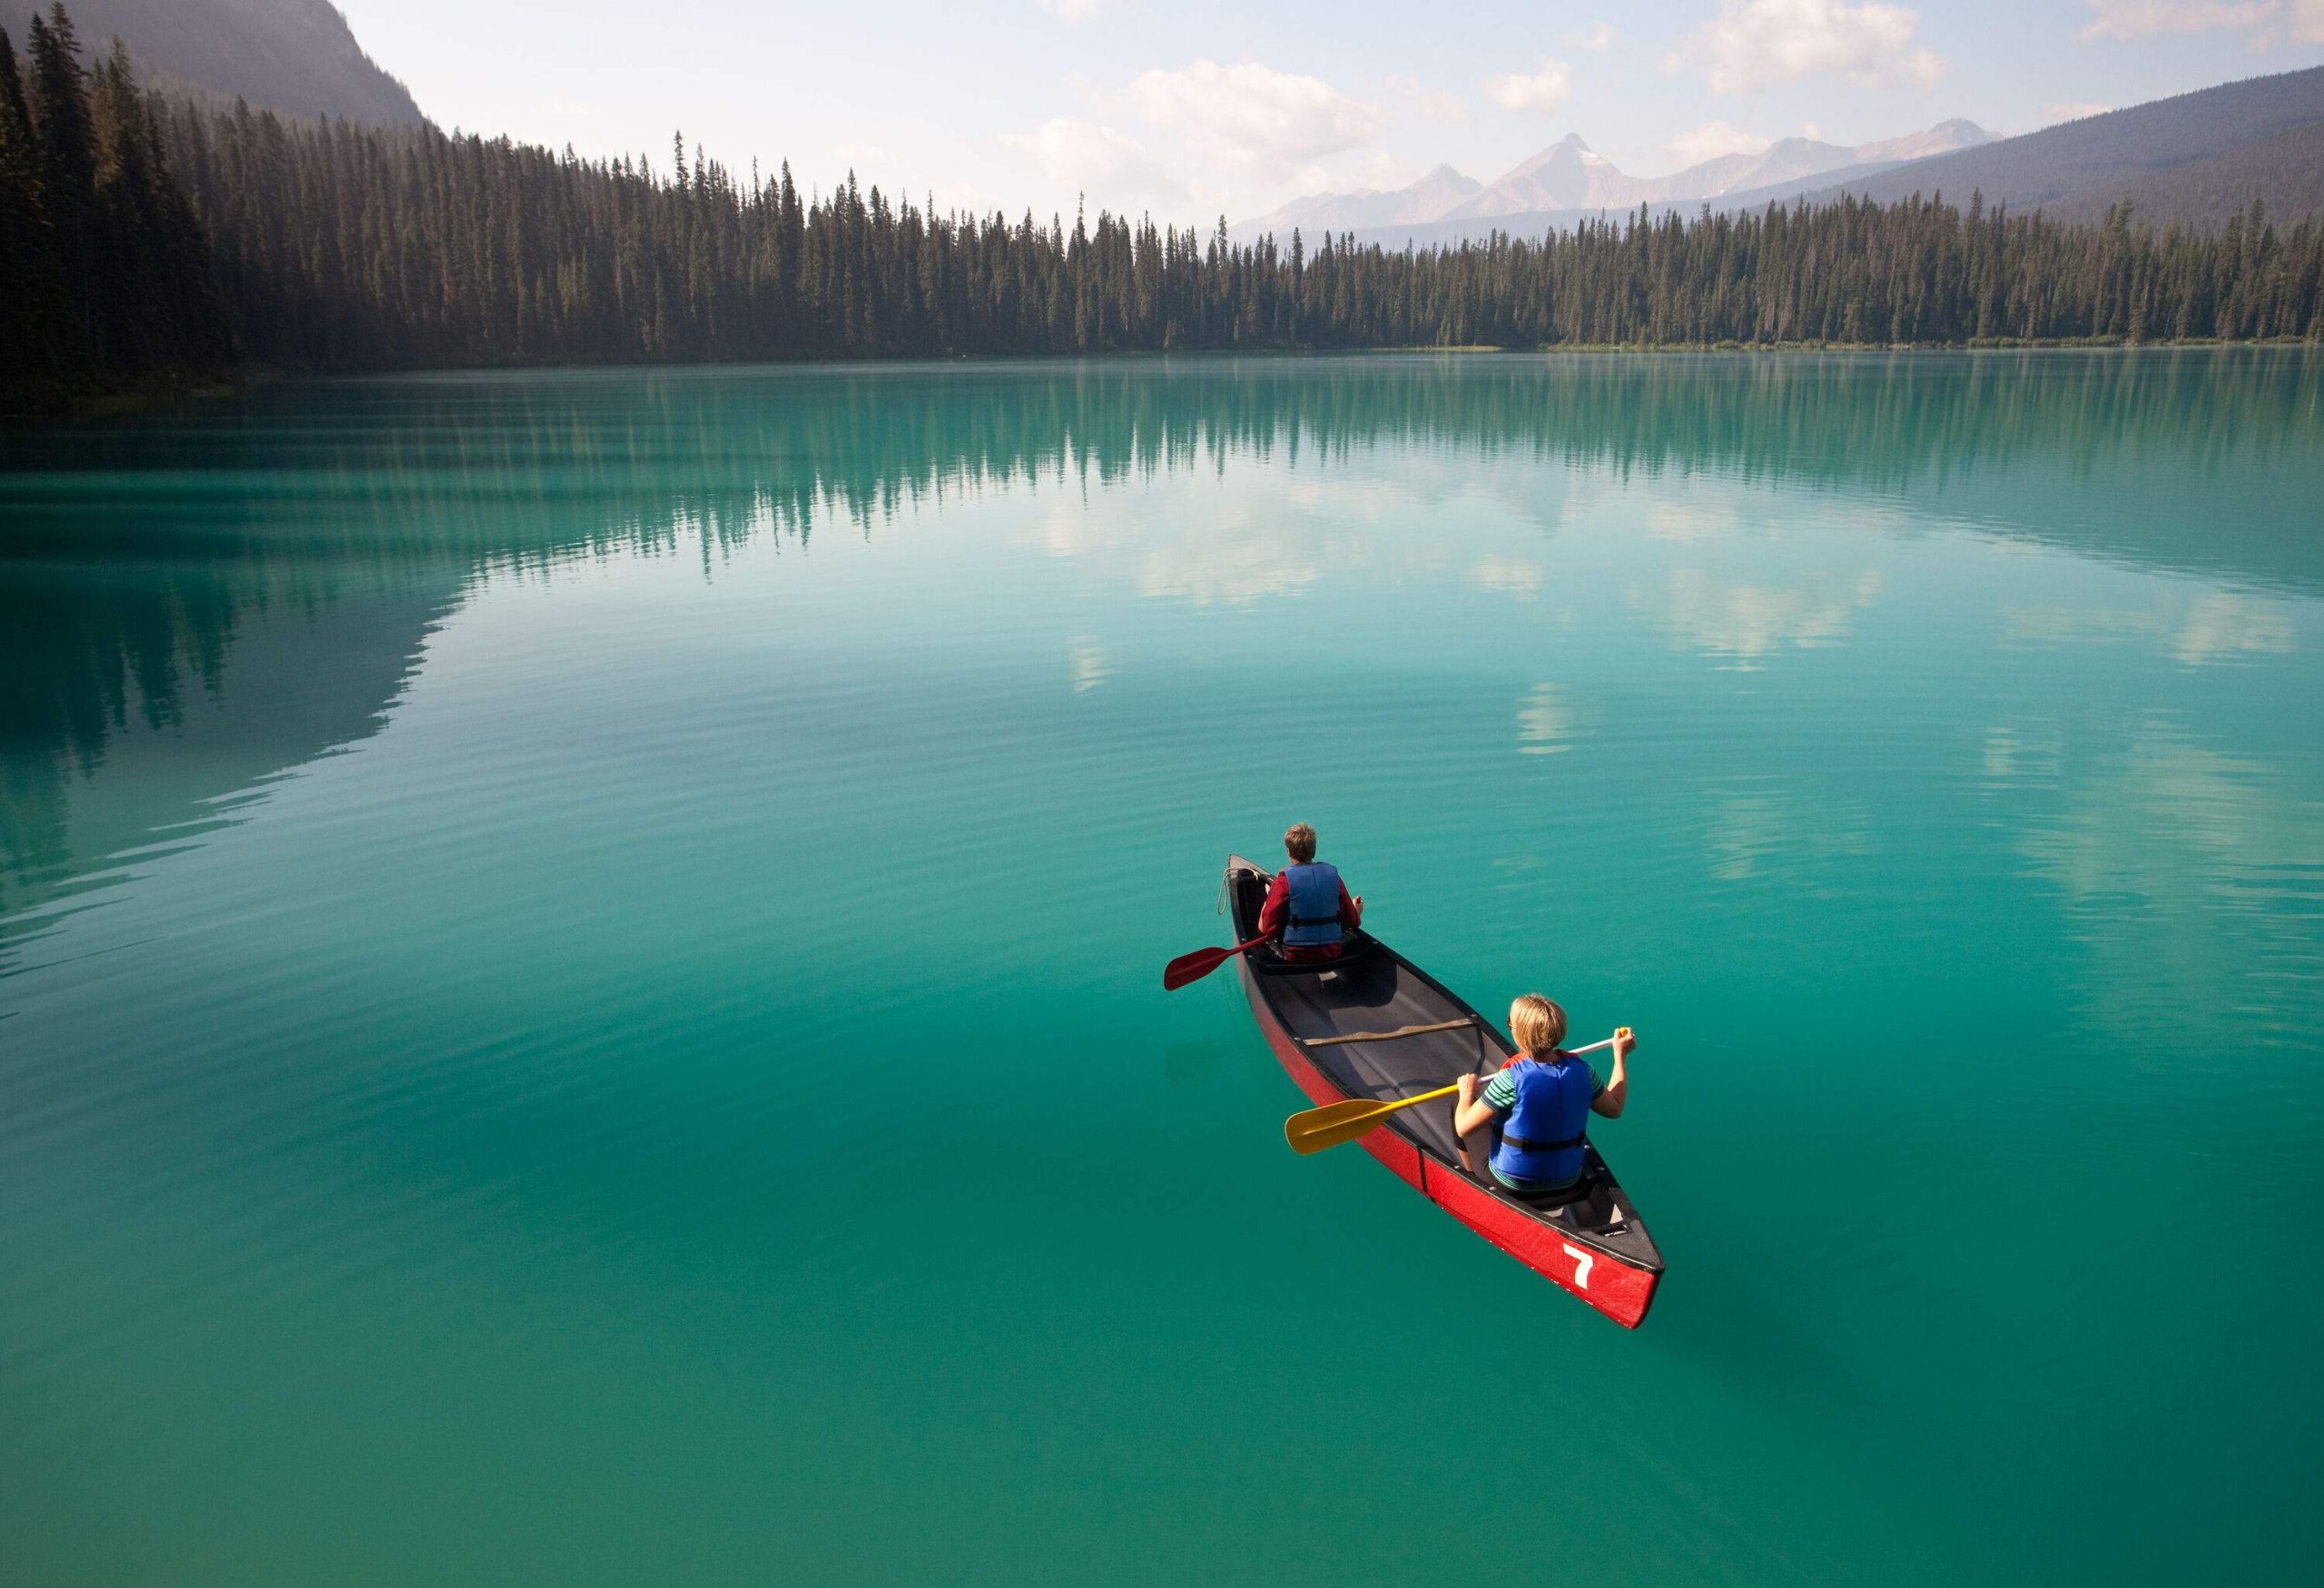 Two people on a canoe floating on a calm lake surrounded by a forest.